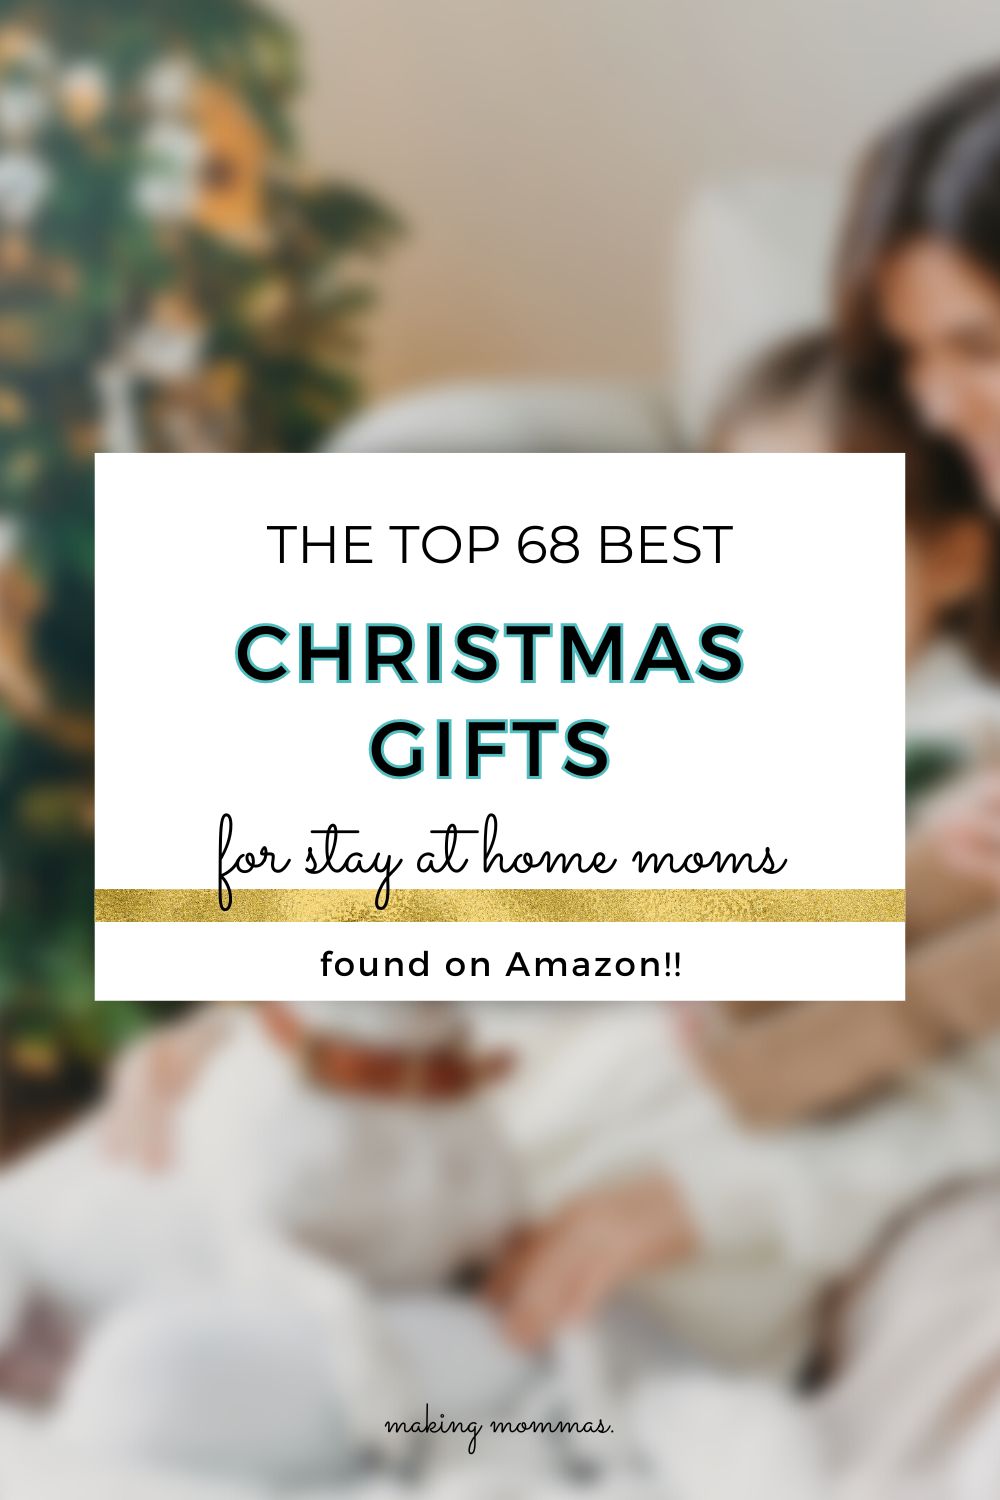 pin of the top Christmas gifts for stay at home moms found on Amazon